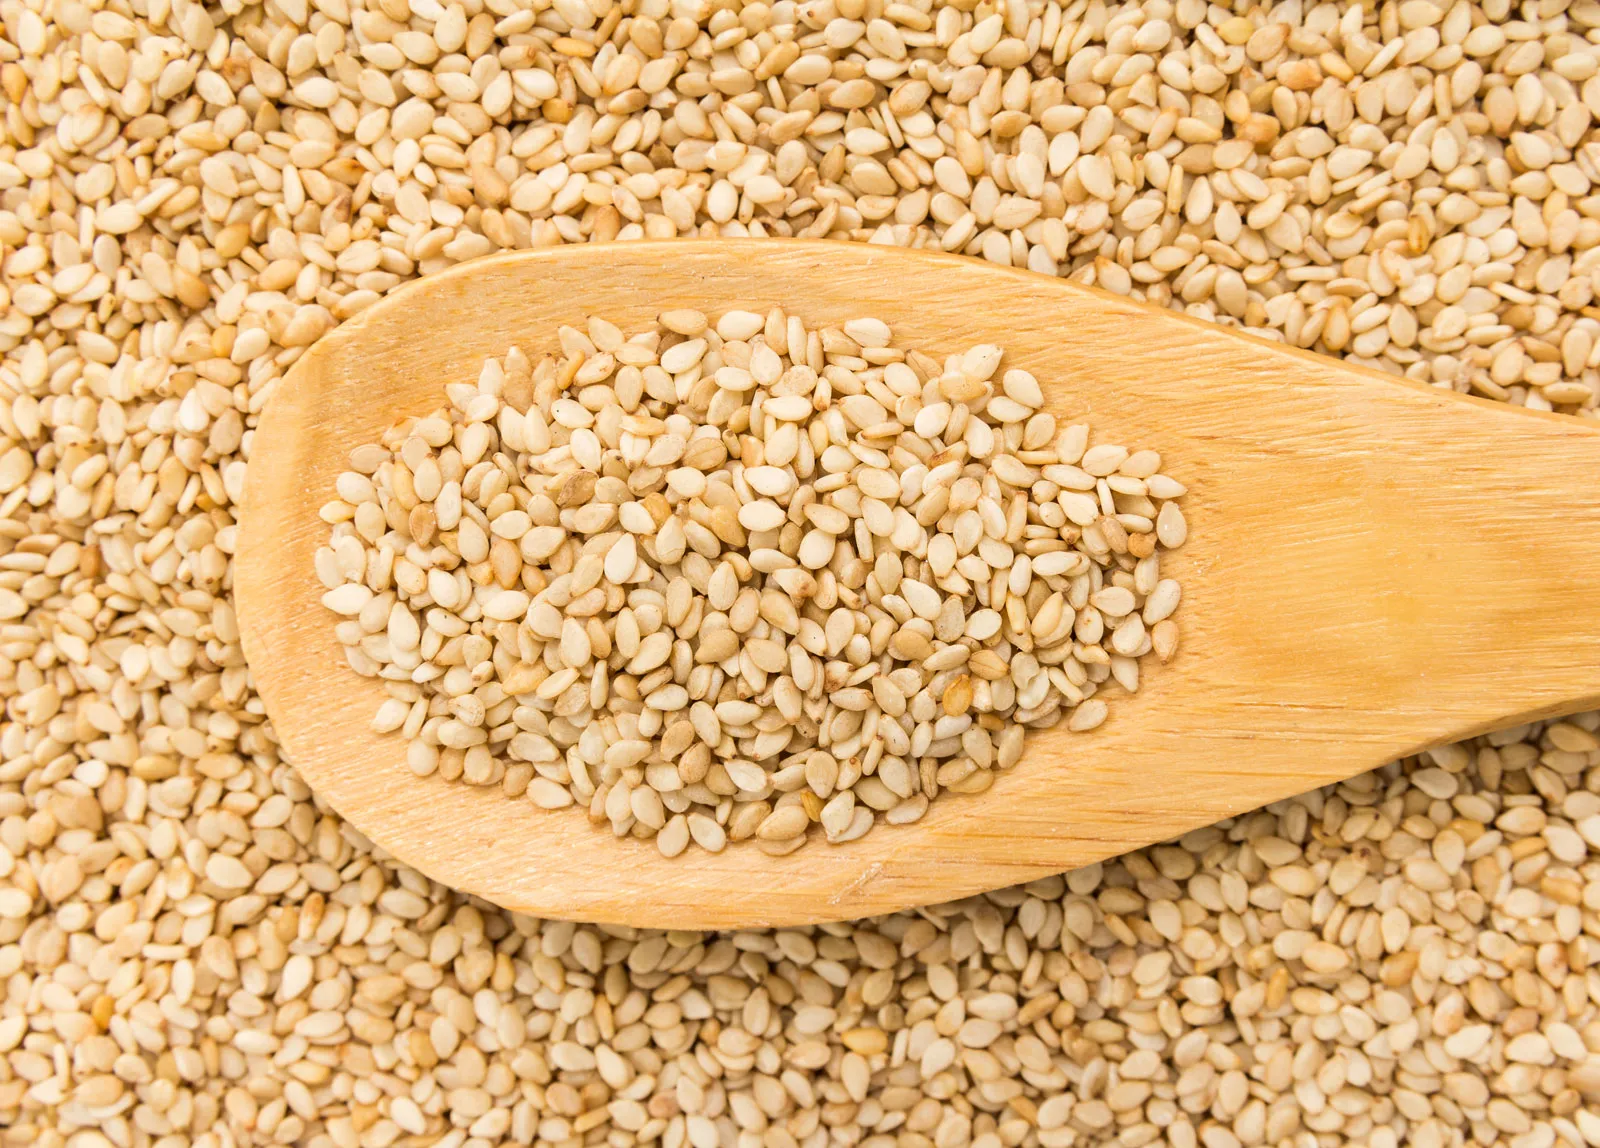 how-to-eat-sesame-seeds-for-fertility